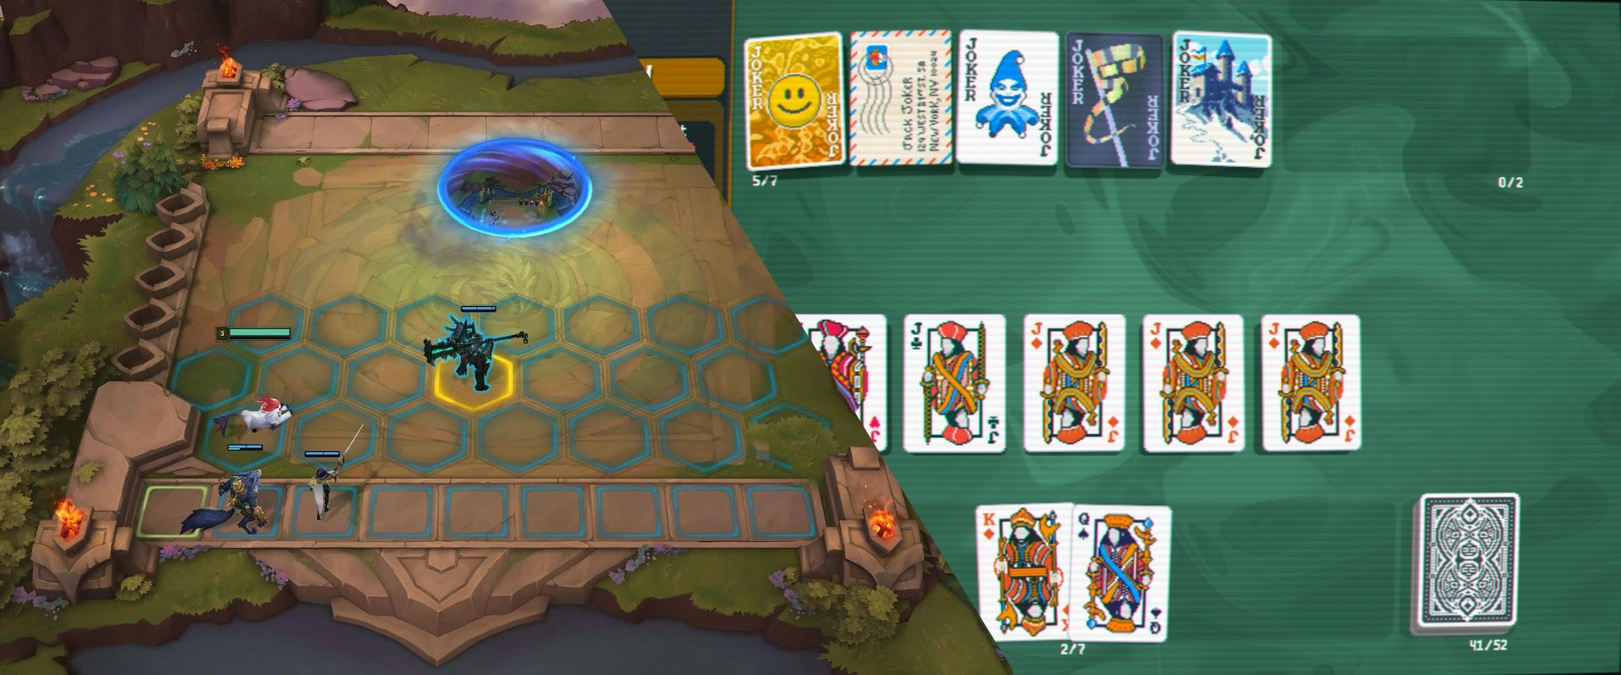 A composite screenshot of two games. On the left, Teamfight Tactics with a grid of characters. On the right, Balatro with several playing cards and jokers.